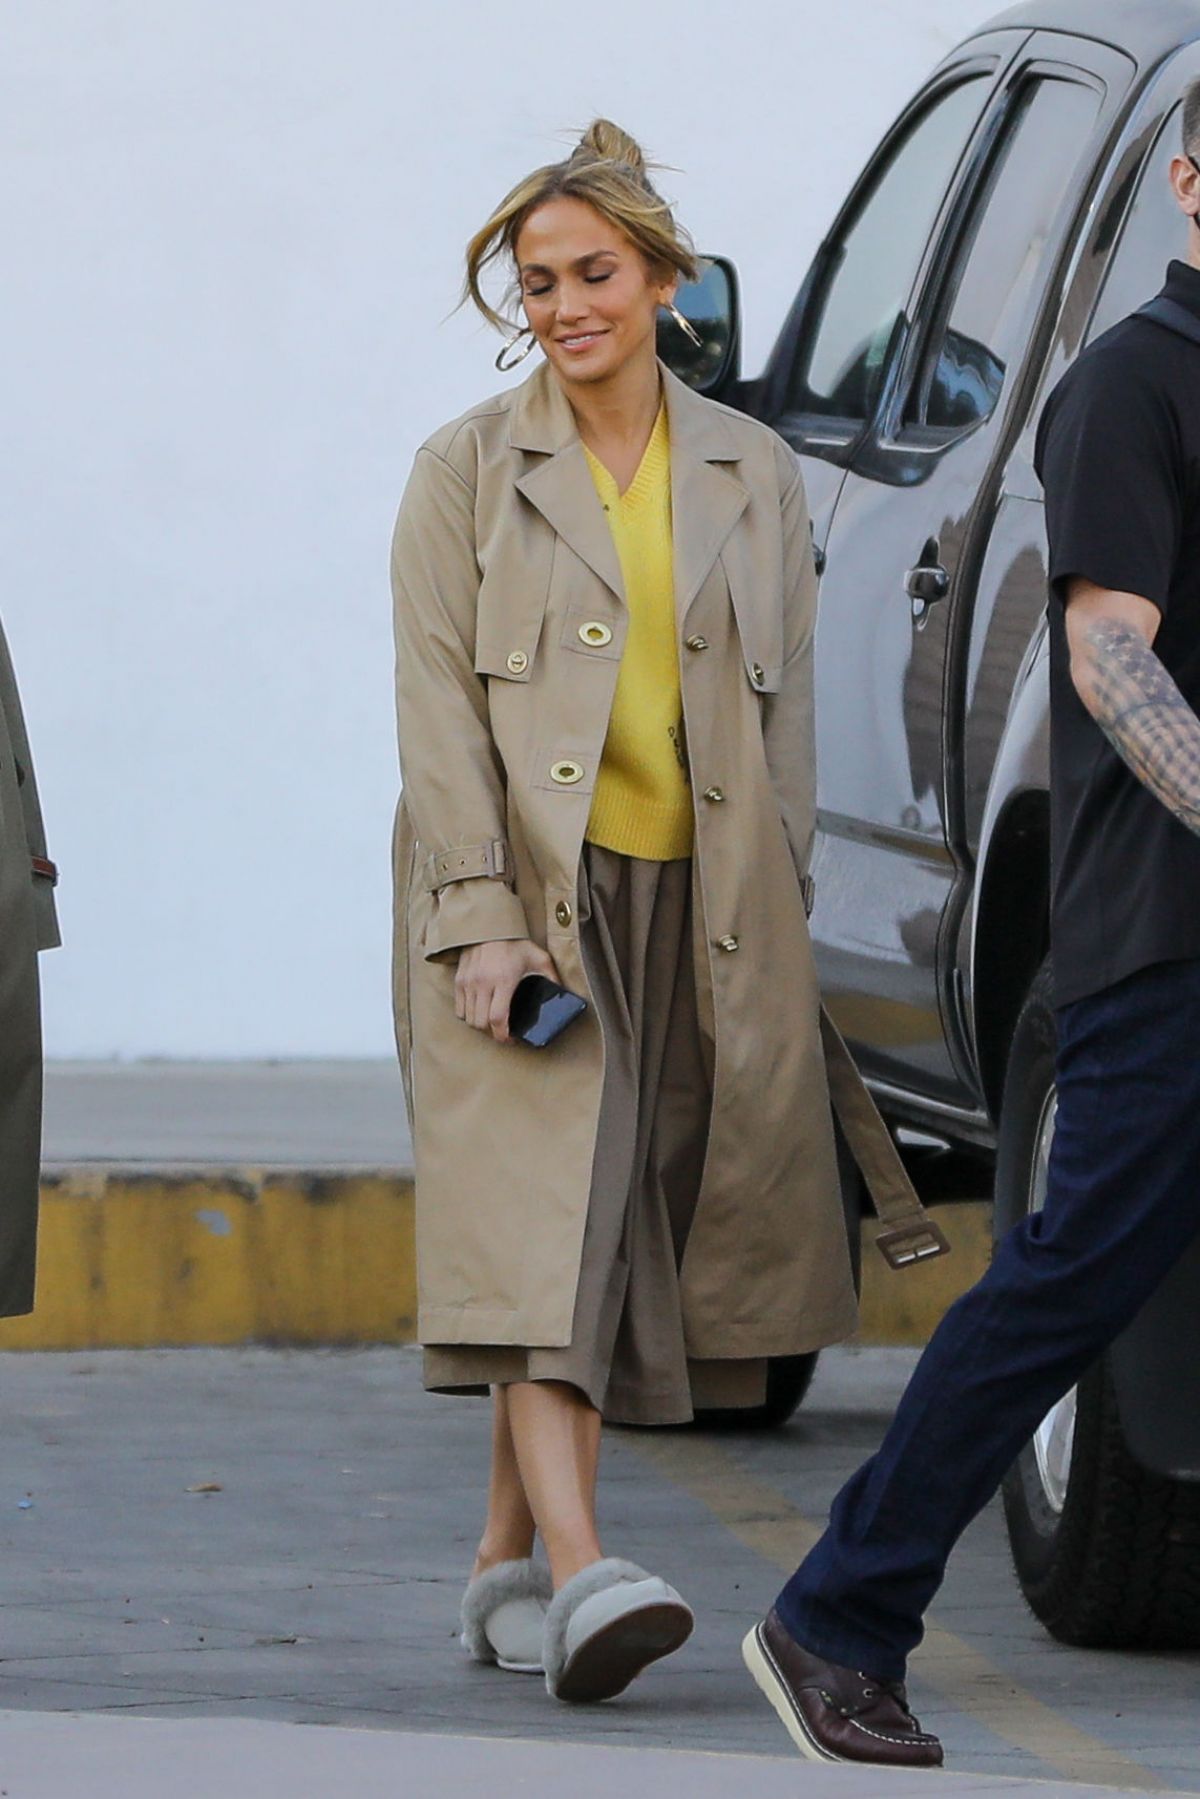 jennifer-lopez-at-a-photoshoot-in-los-angeles-11-11-2020-12.jpg